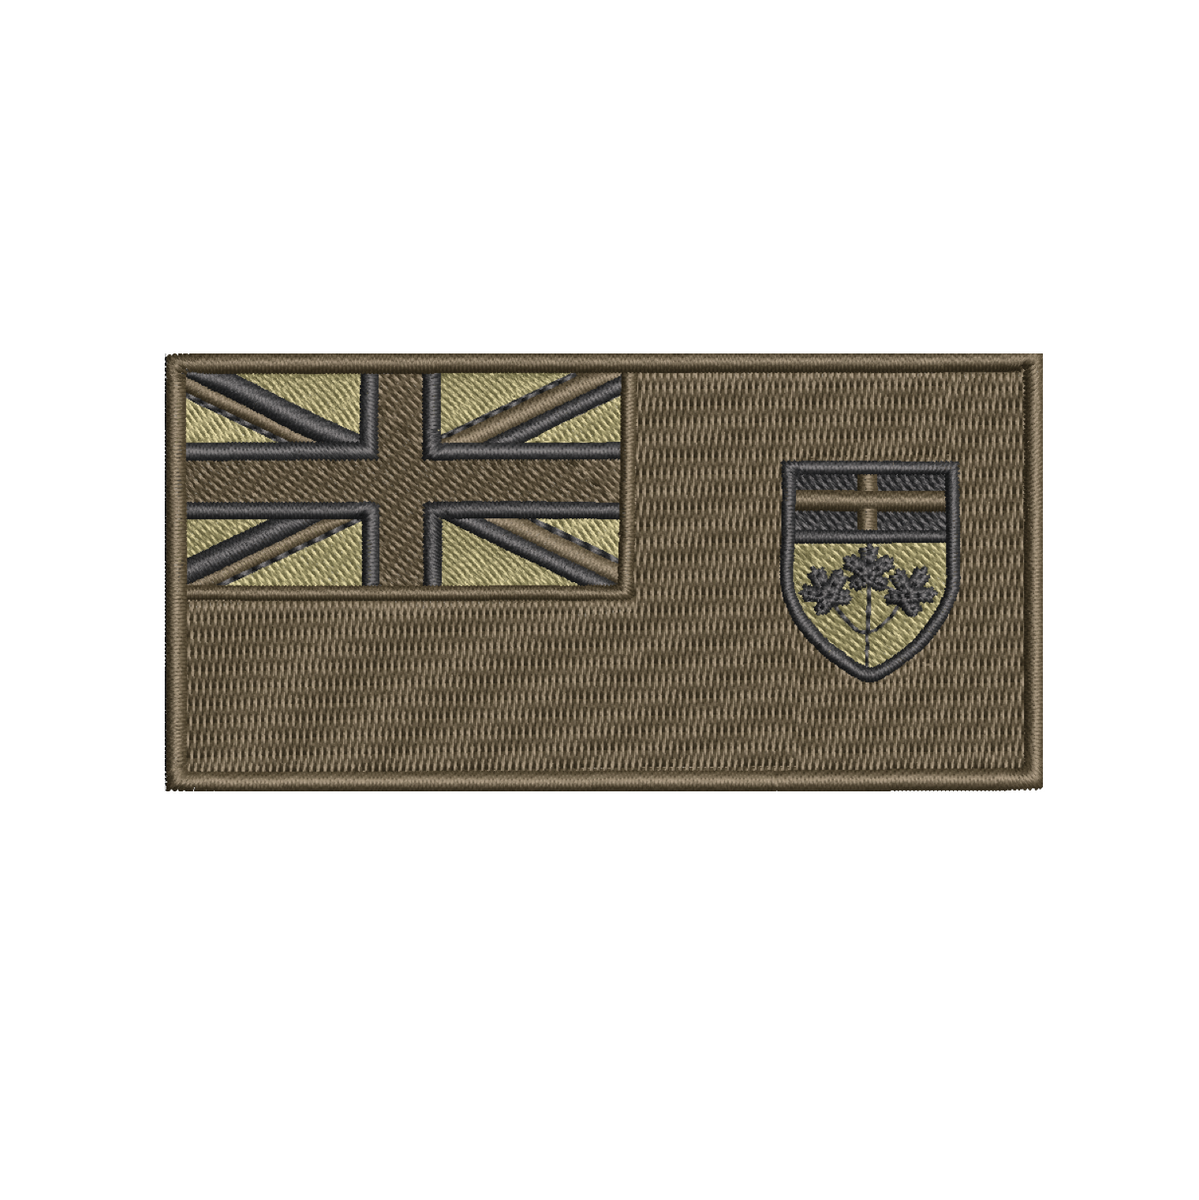 Canadian Provincial Flag Patches (Embroidered) – CPGear Tactical